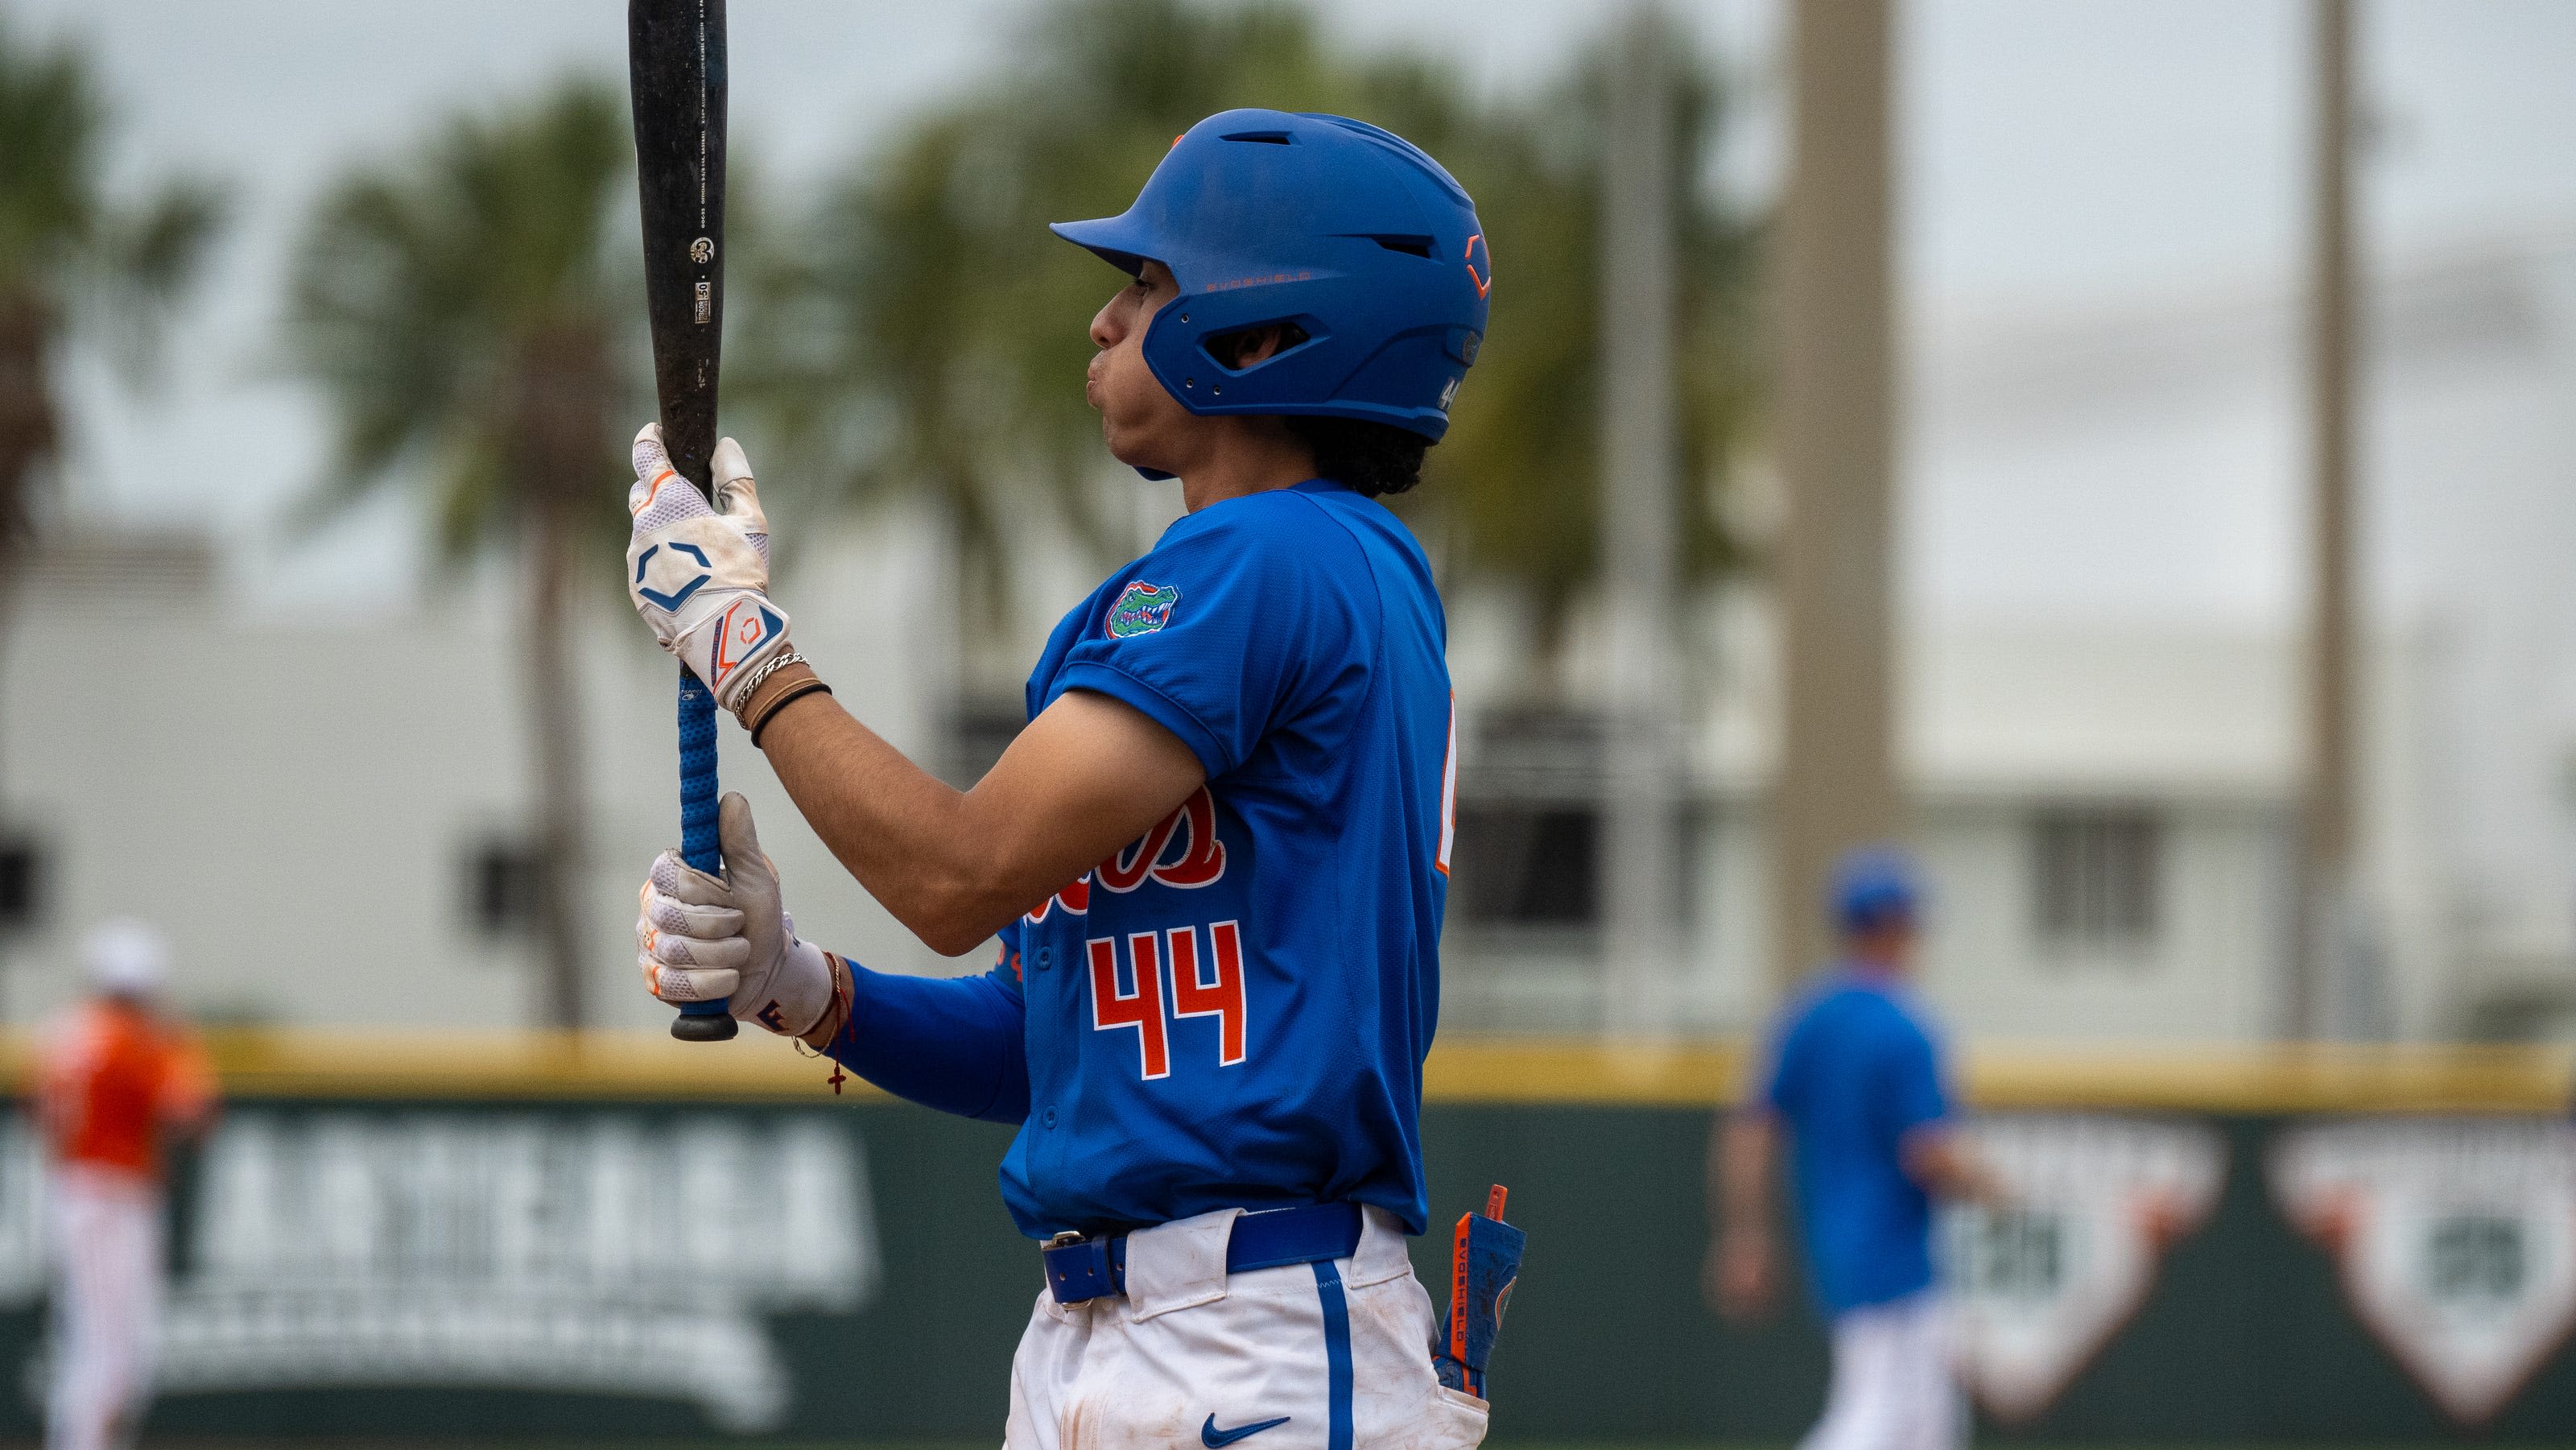 Where Florida baseball stands in latest NCAA Tournament field projections